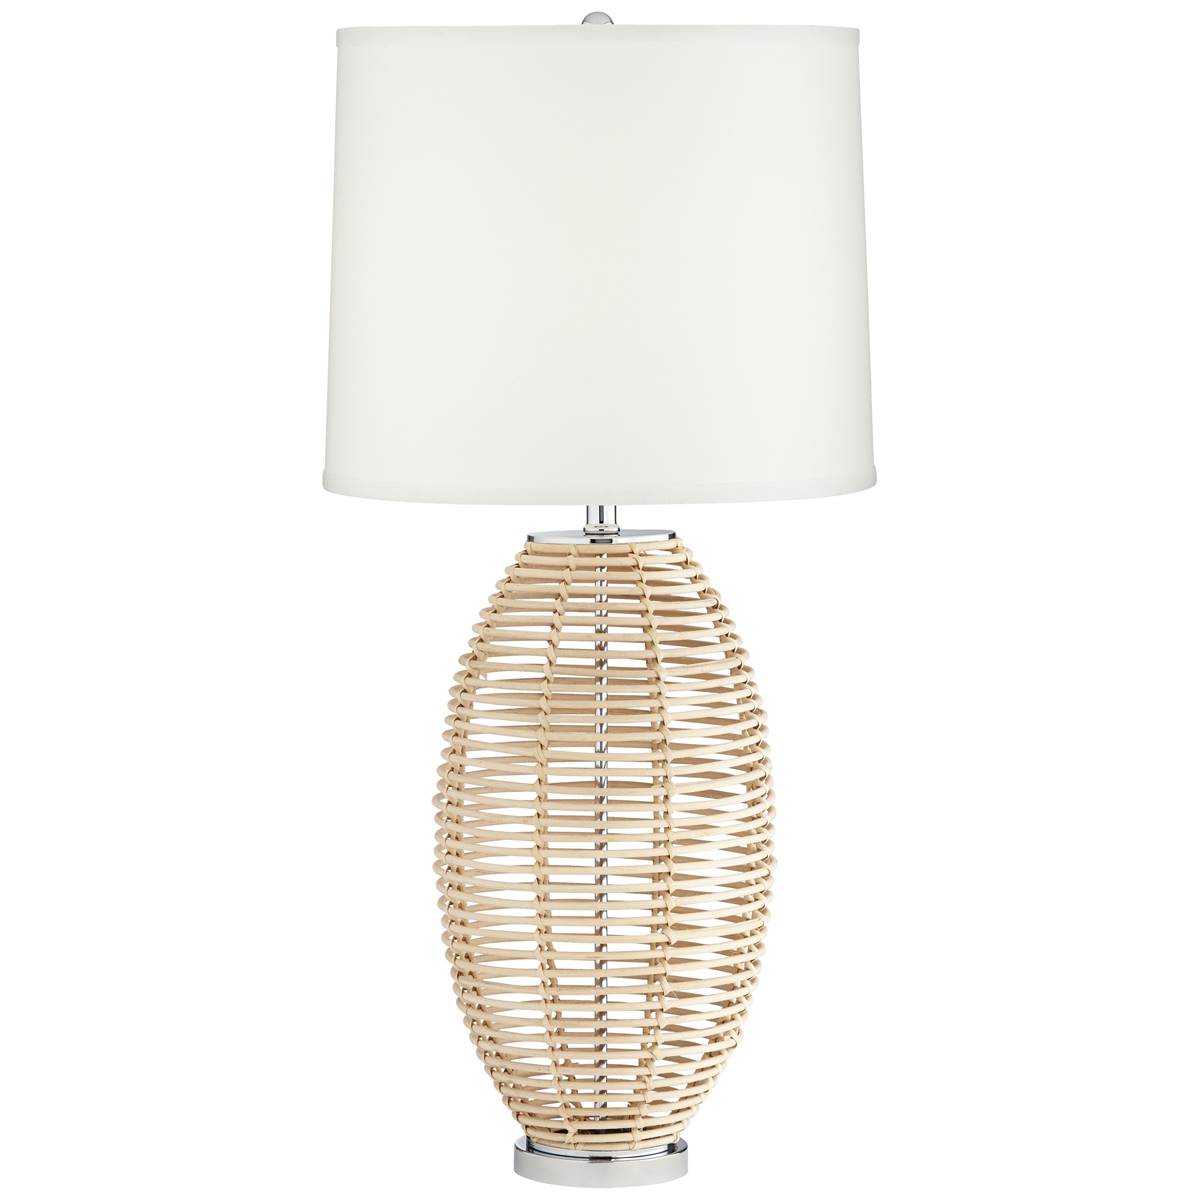 Pacific Coast Lighting Knoll 33in. Natural Table Lamp